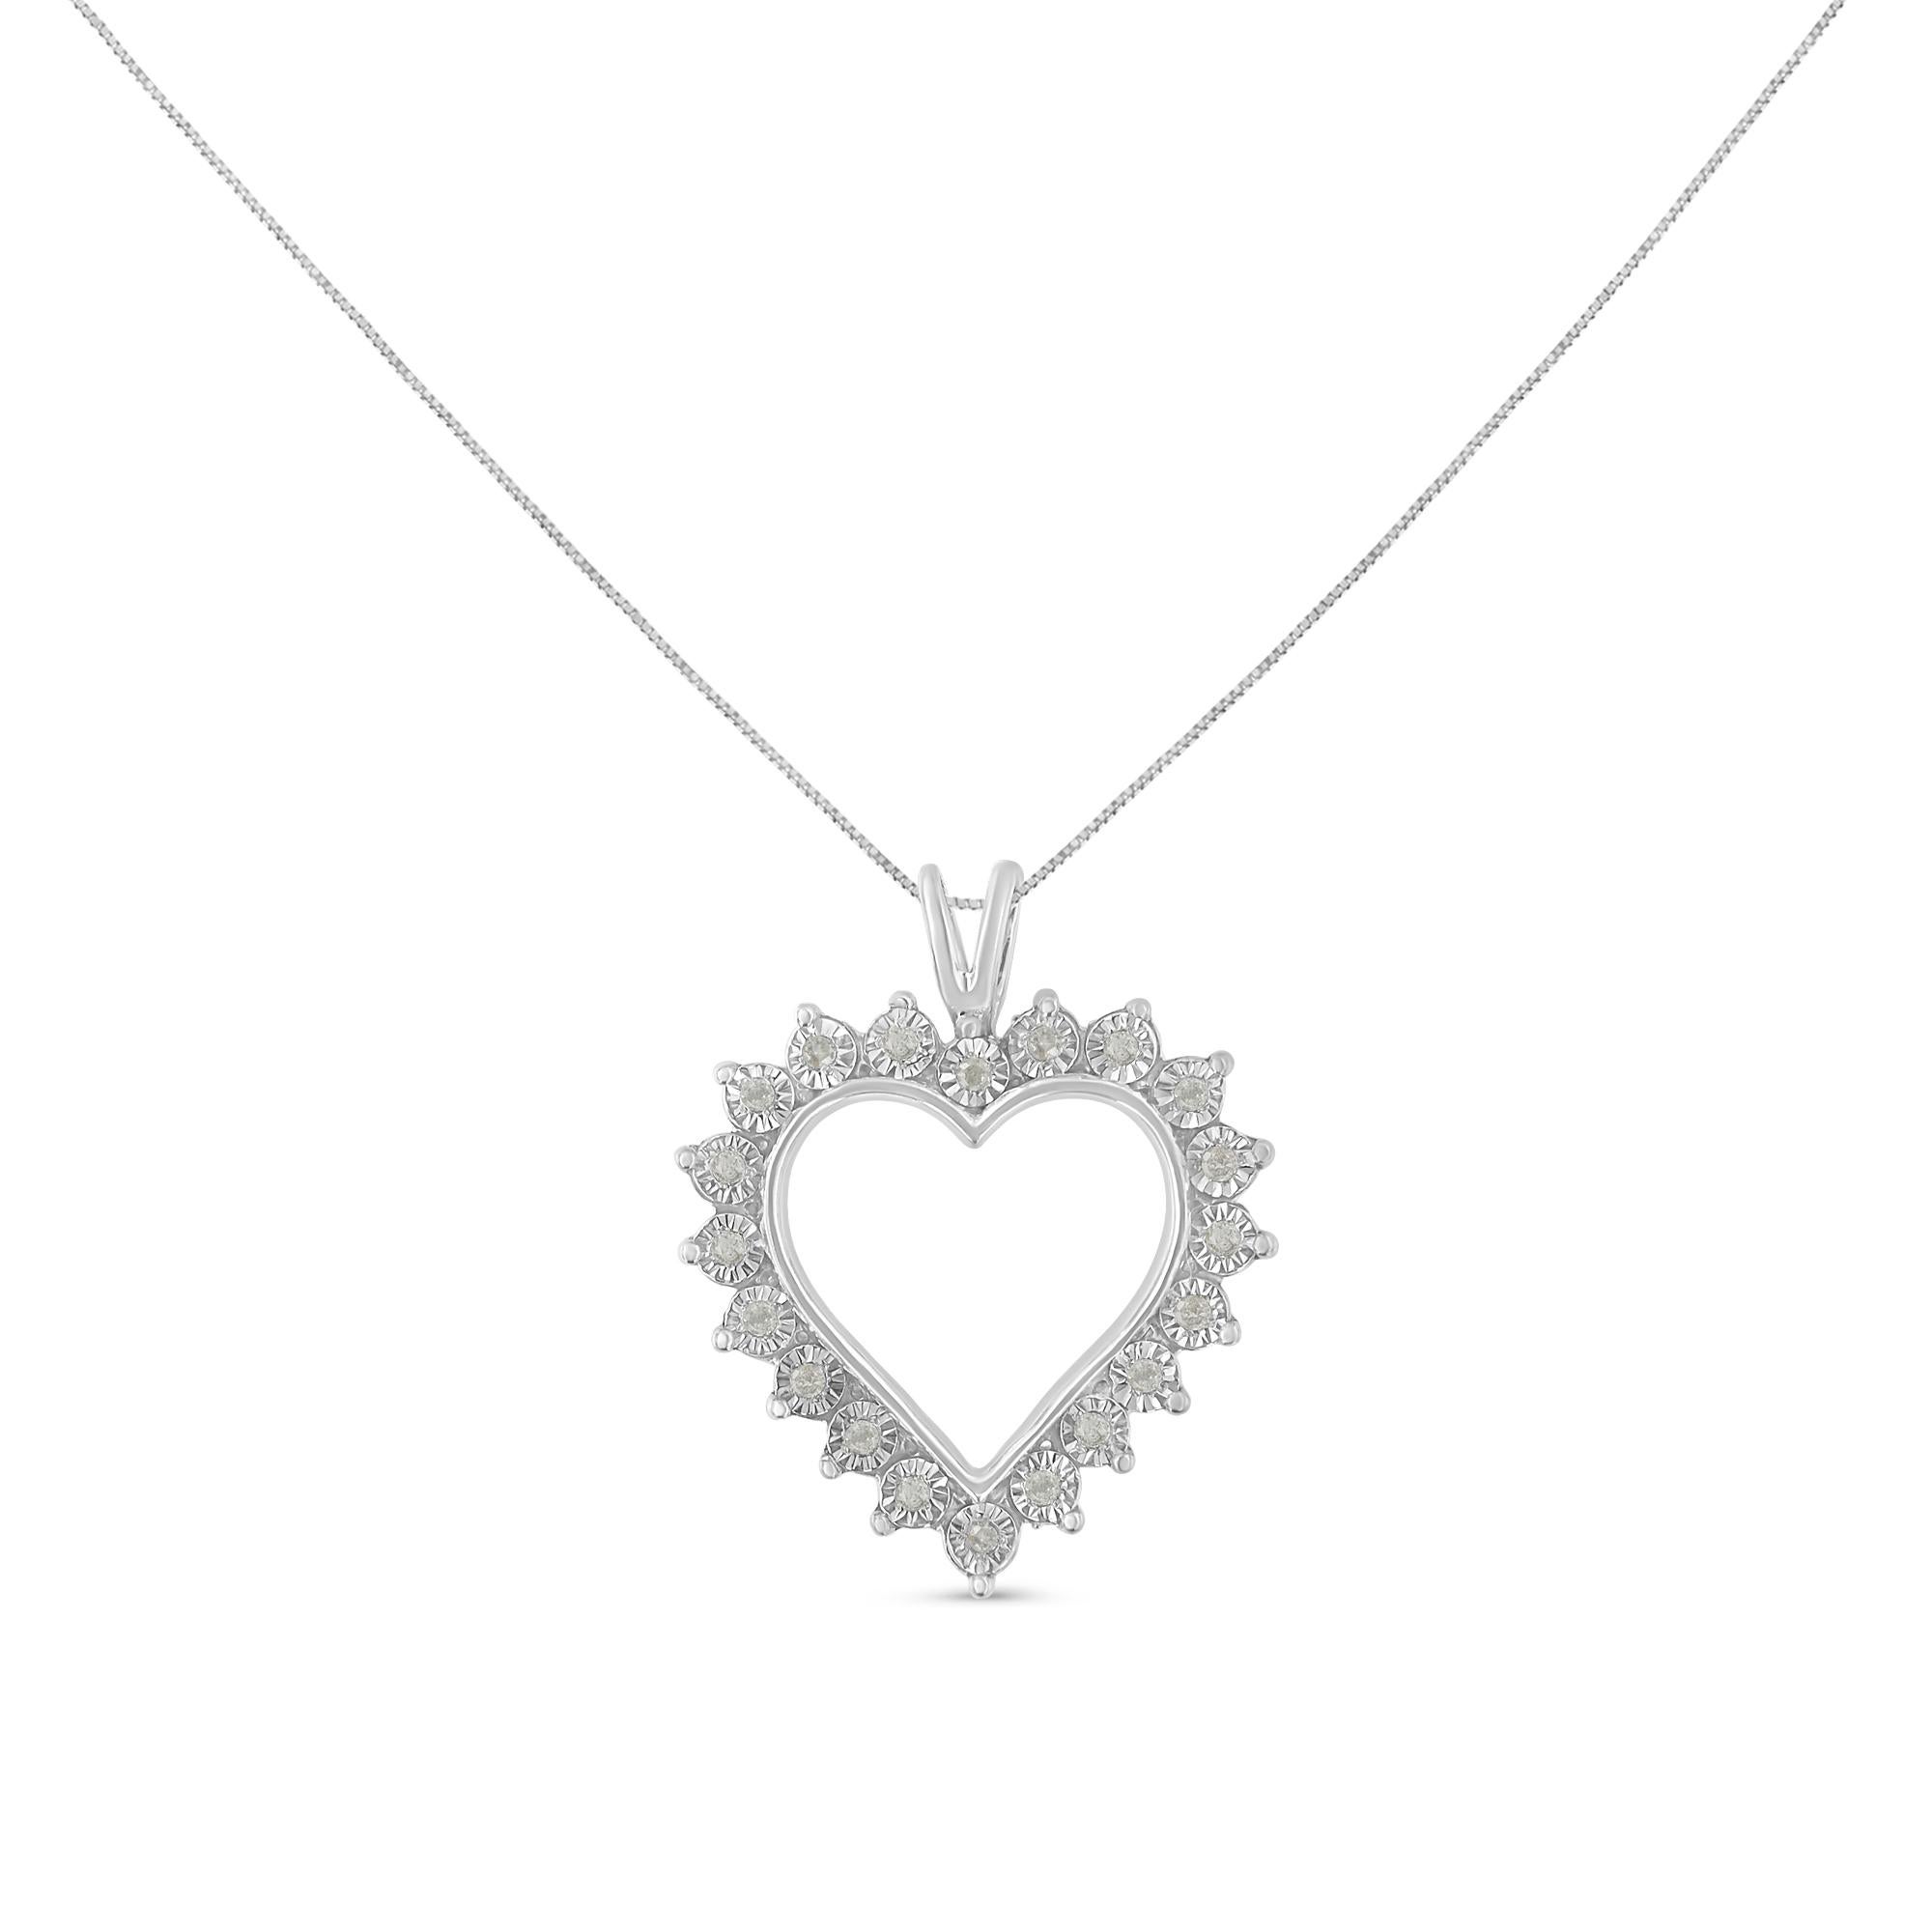 Express your love with this stunningly unique diamond love heart pendant. Meticulously crafted, this necklace is made from the finest .925 sterling silver and is embellished with 20 rose cut diamonds. Each diamond shines in a miracle setting to give